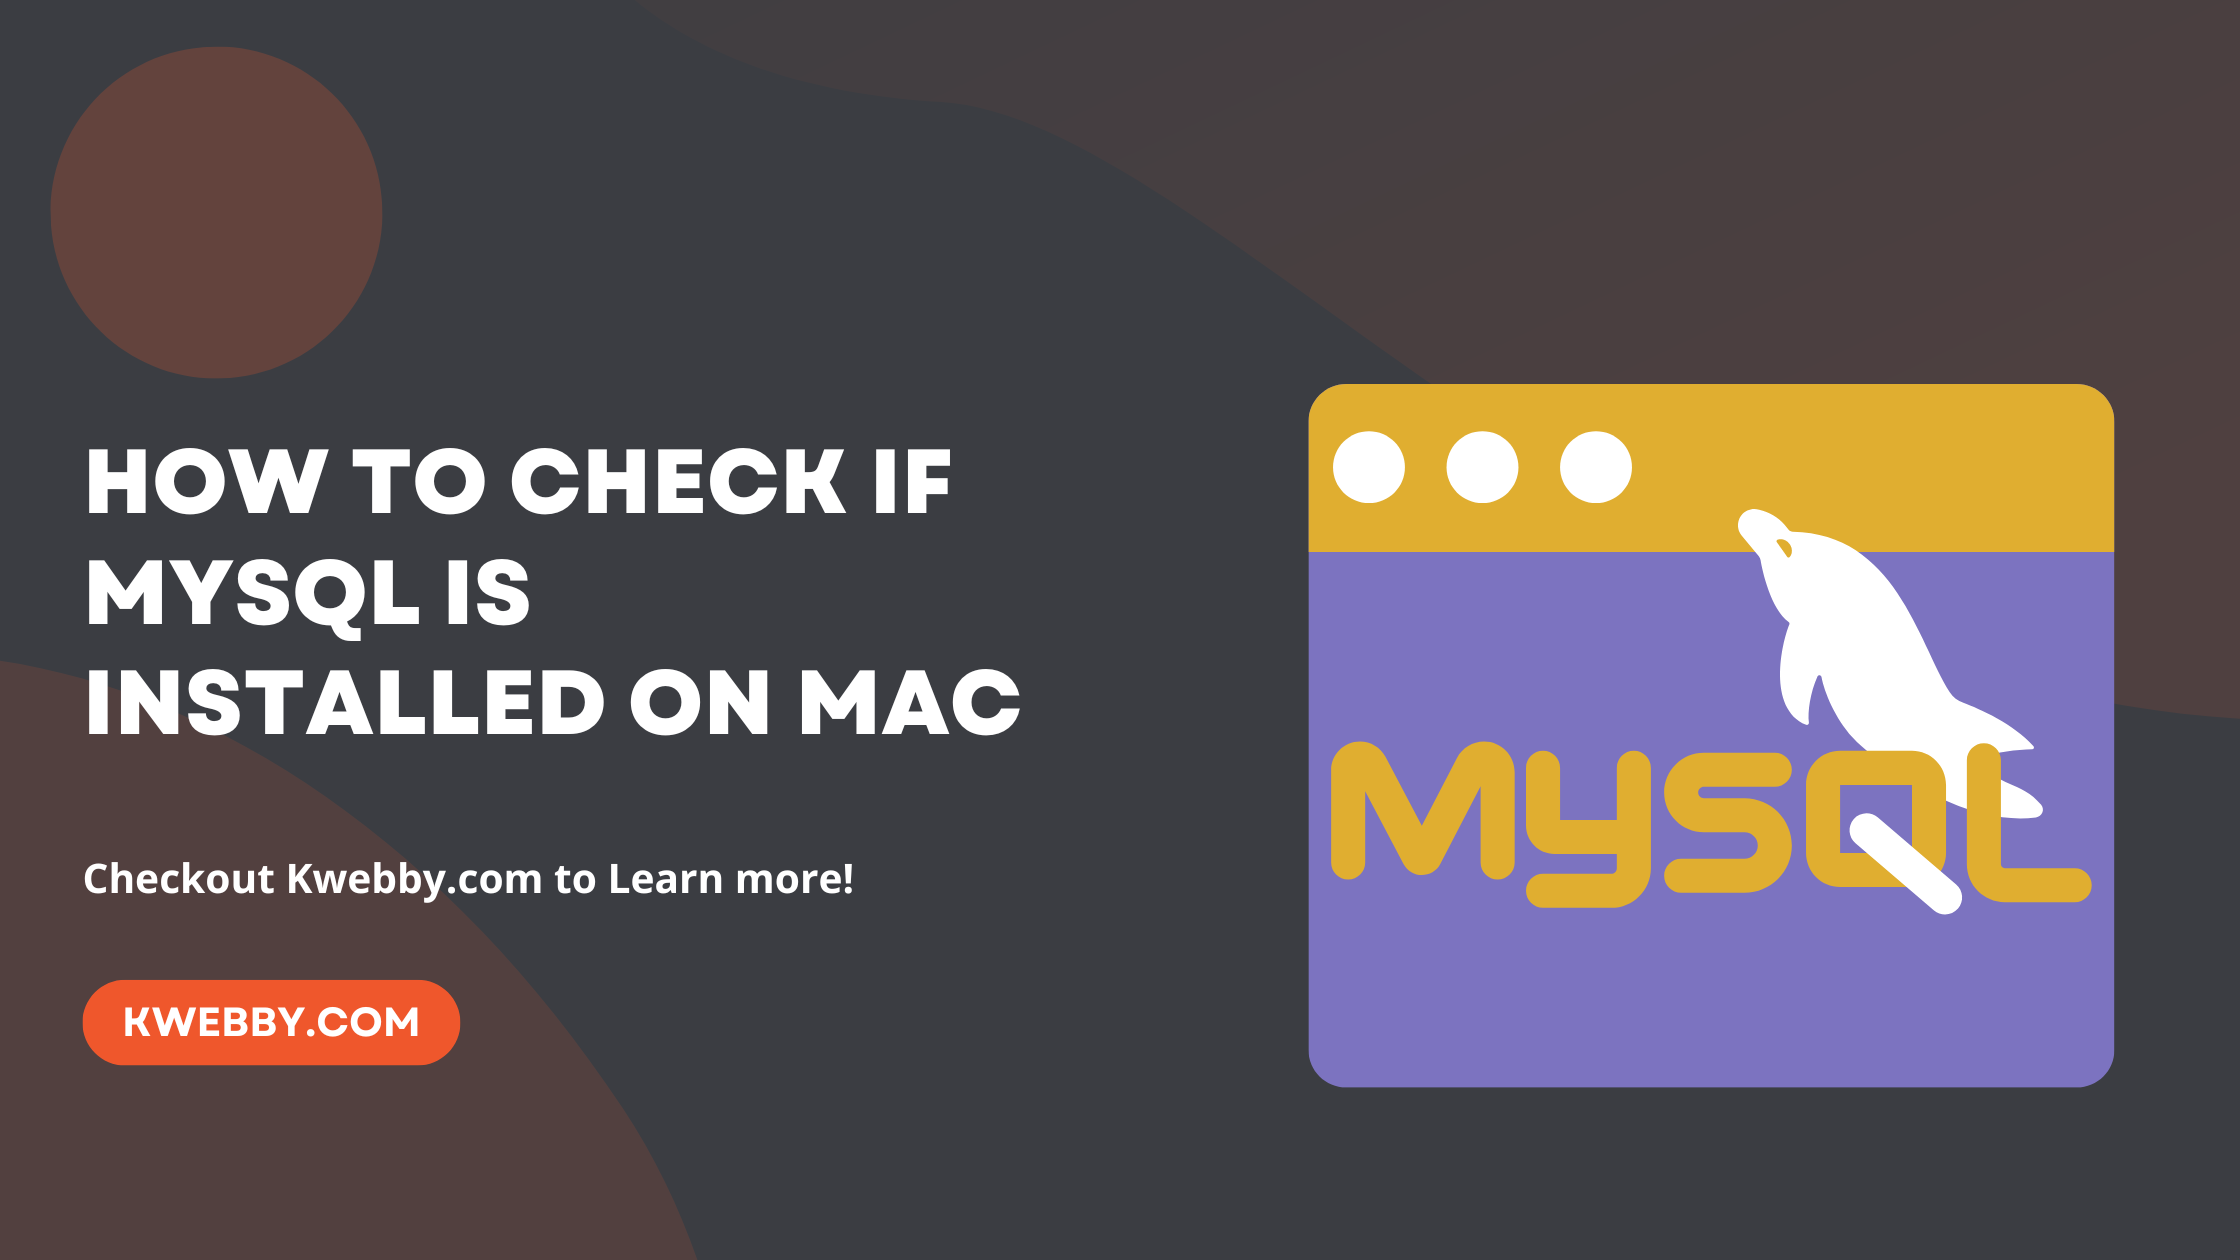 How to check if MySQL is installed on Mac